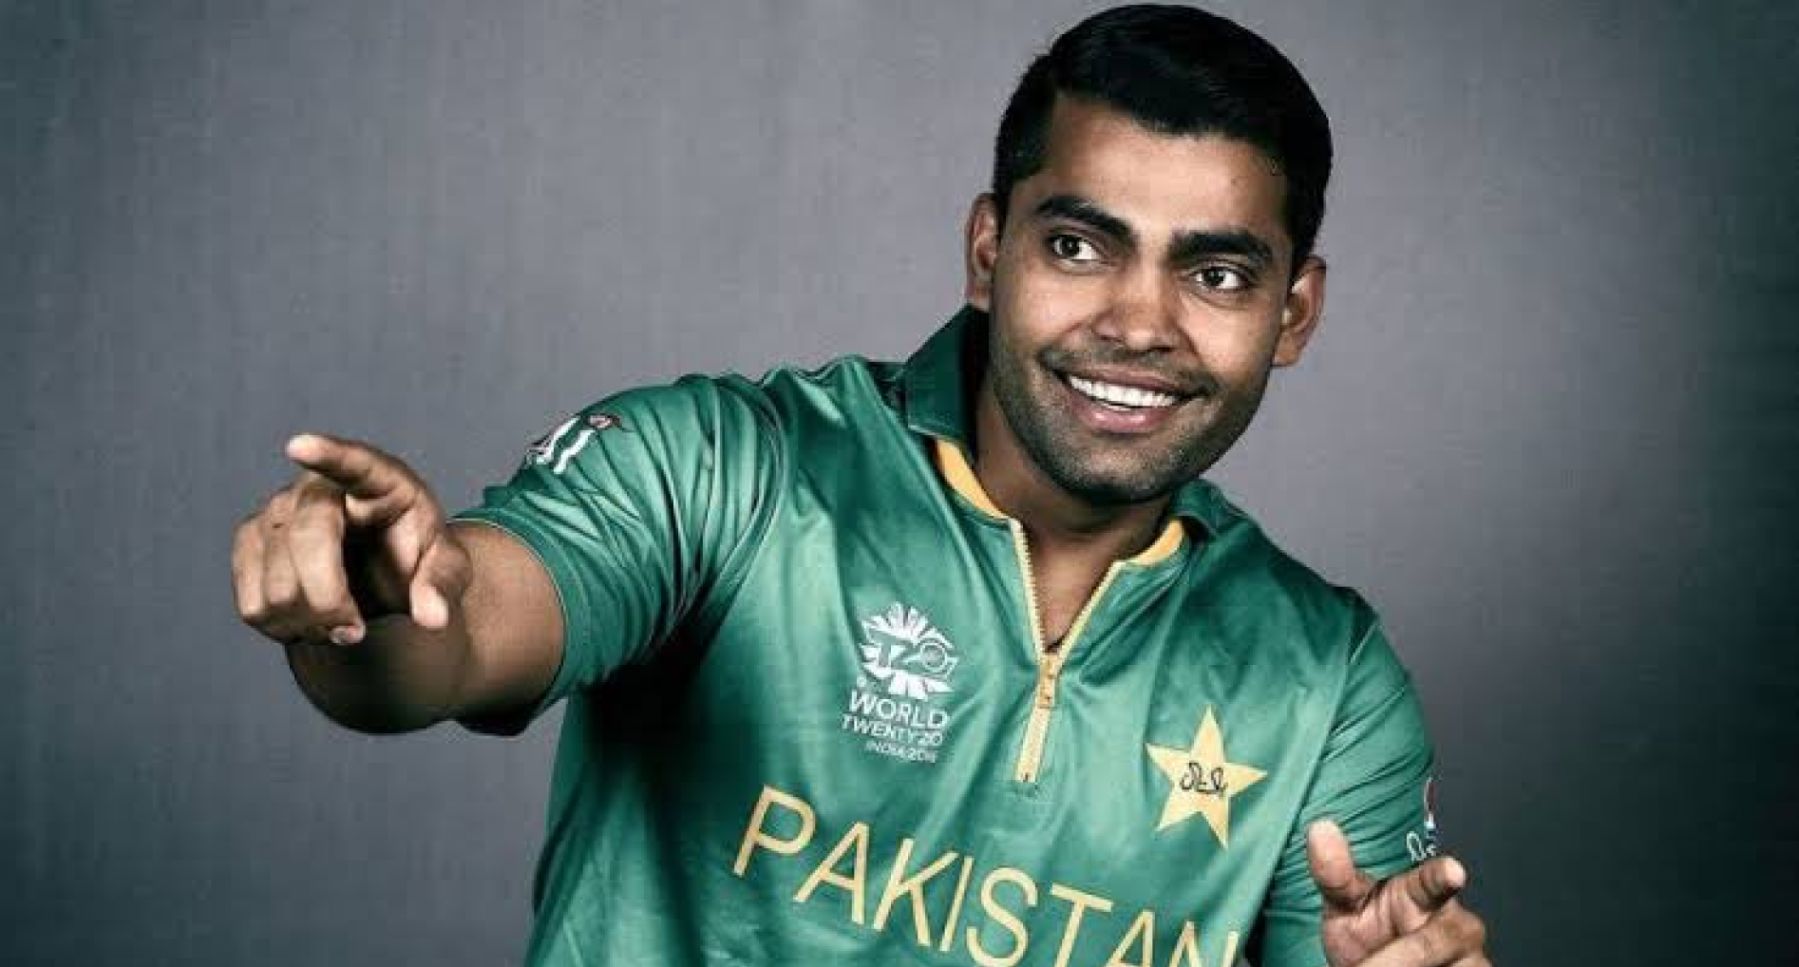 Umar Akmal pays PKR 4.5 million fine to PCB, could rejoin professional cricket